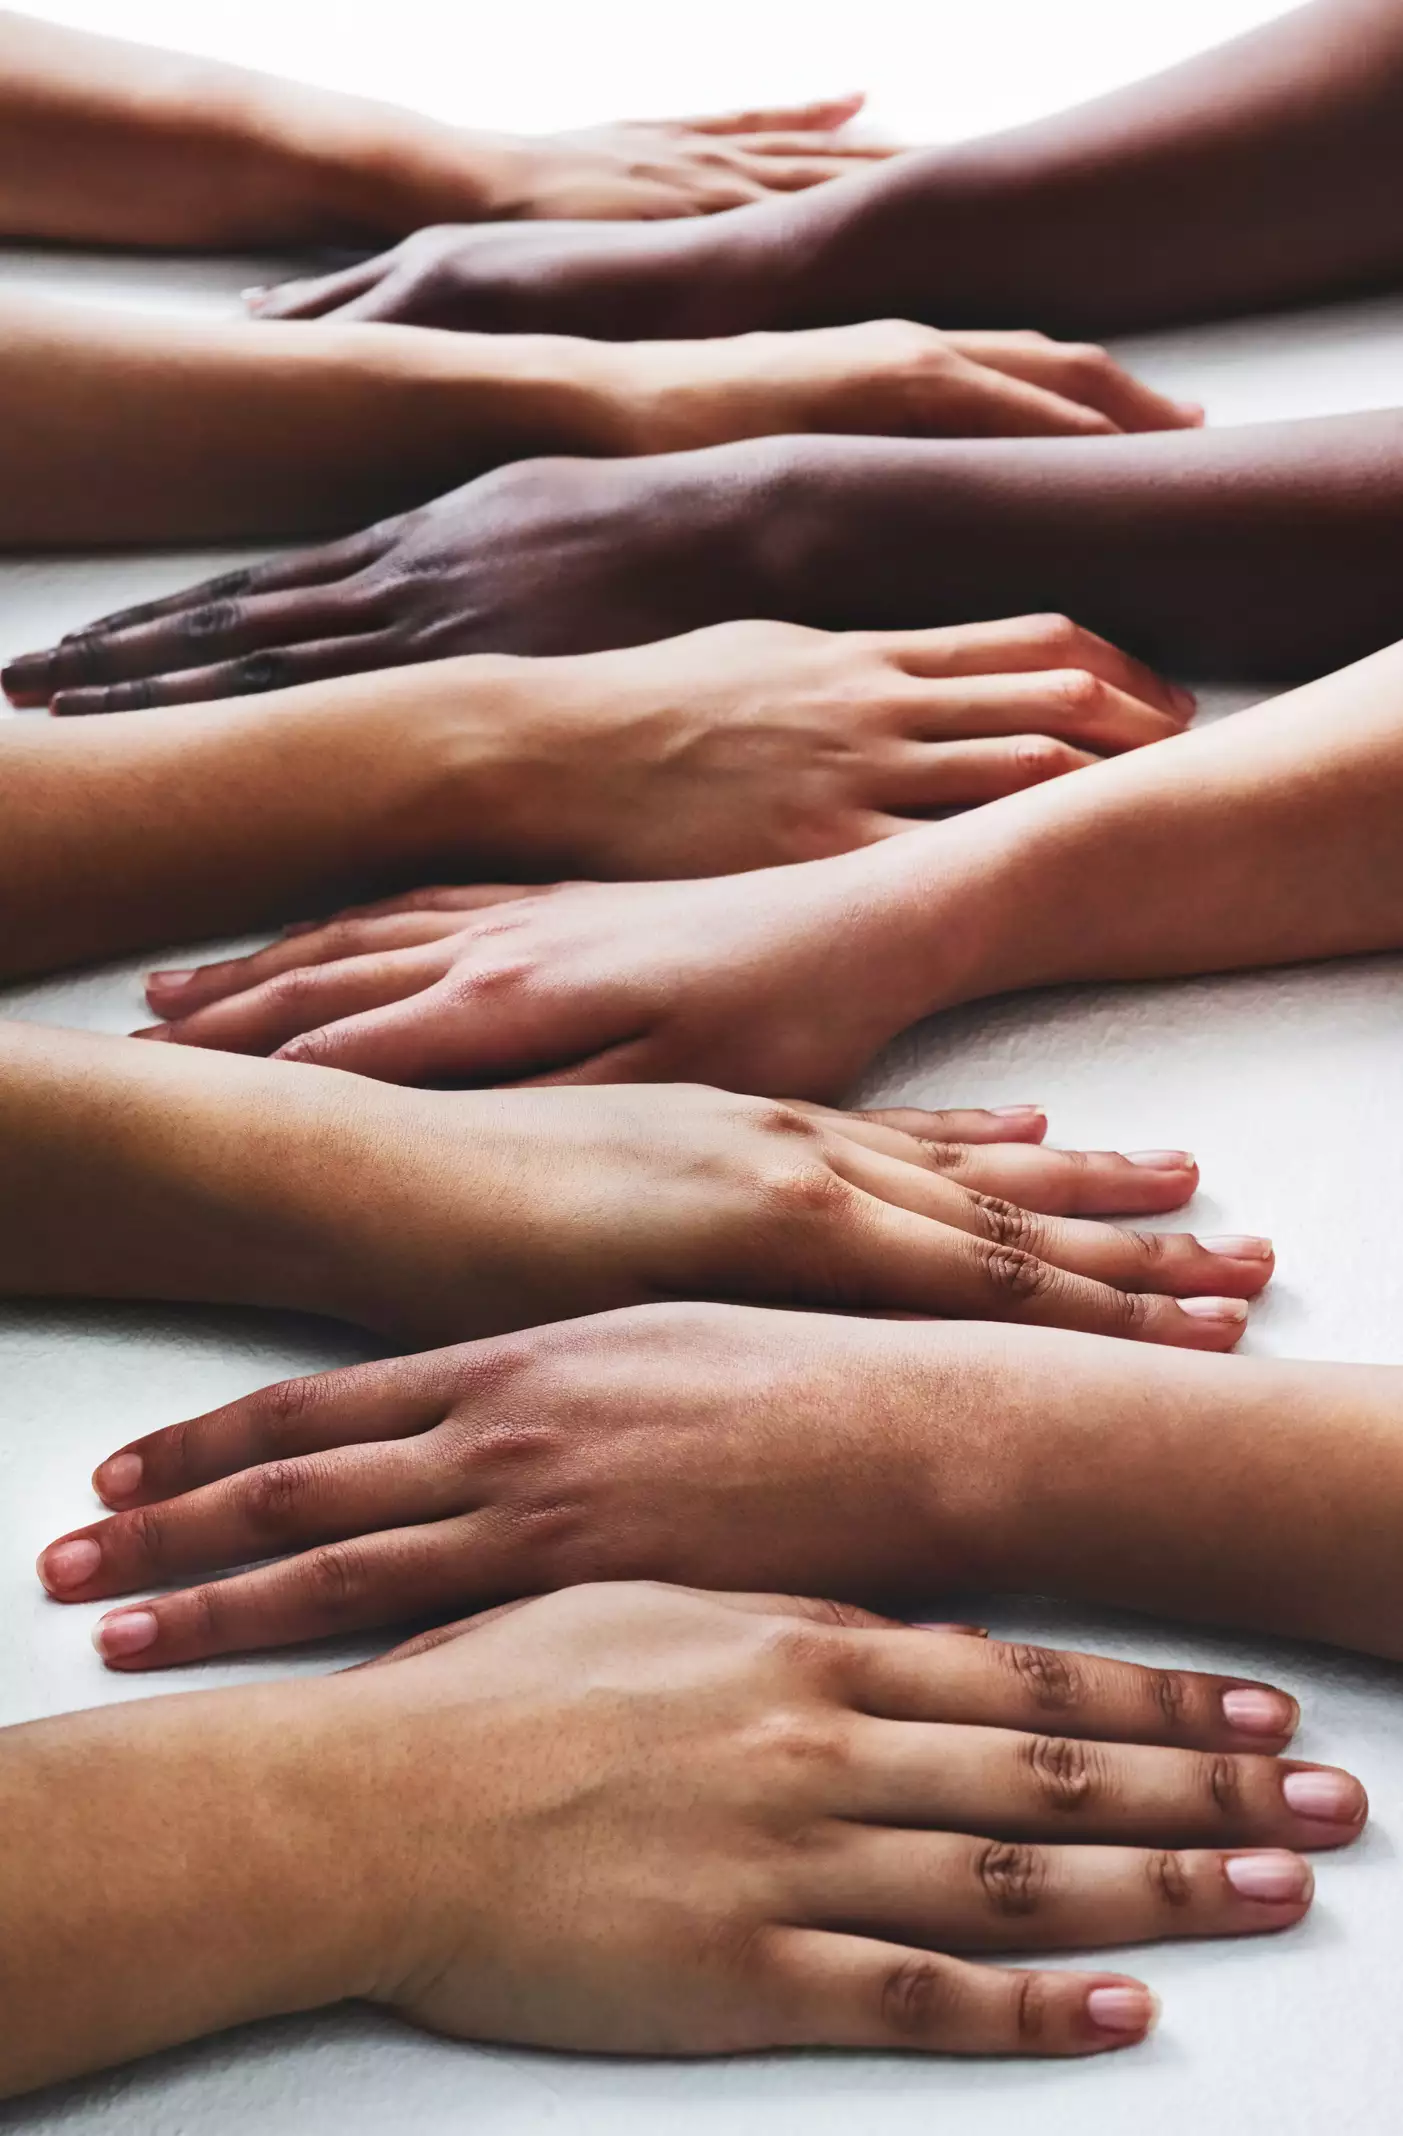 many hands of different skin tones